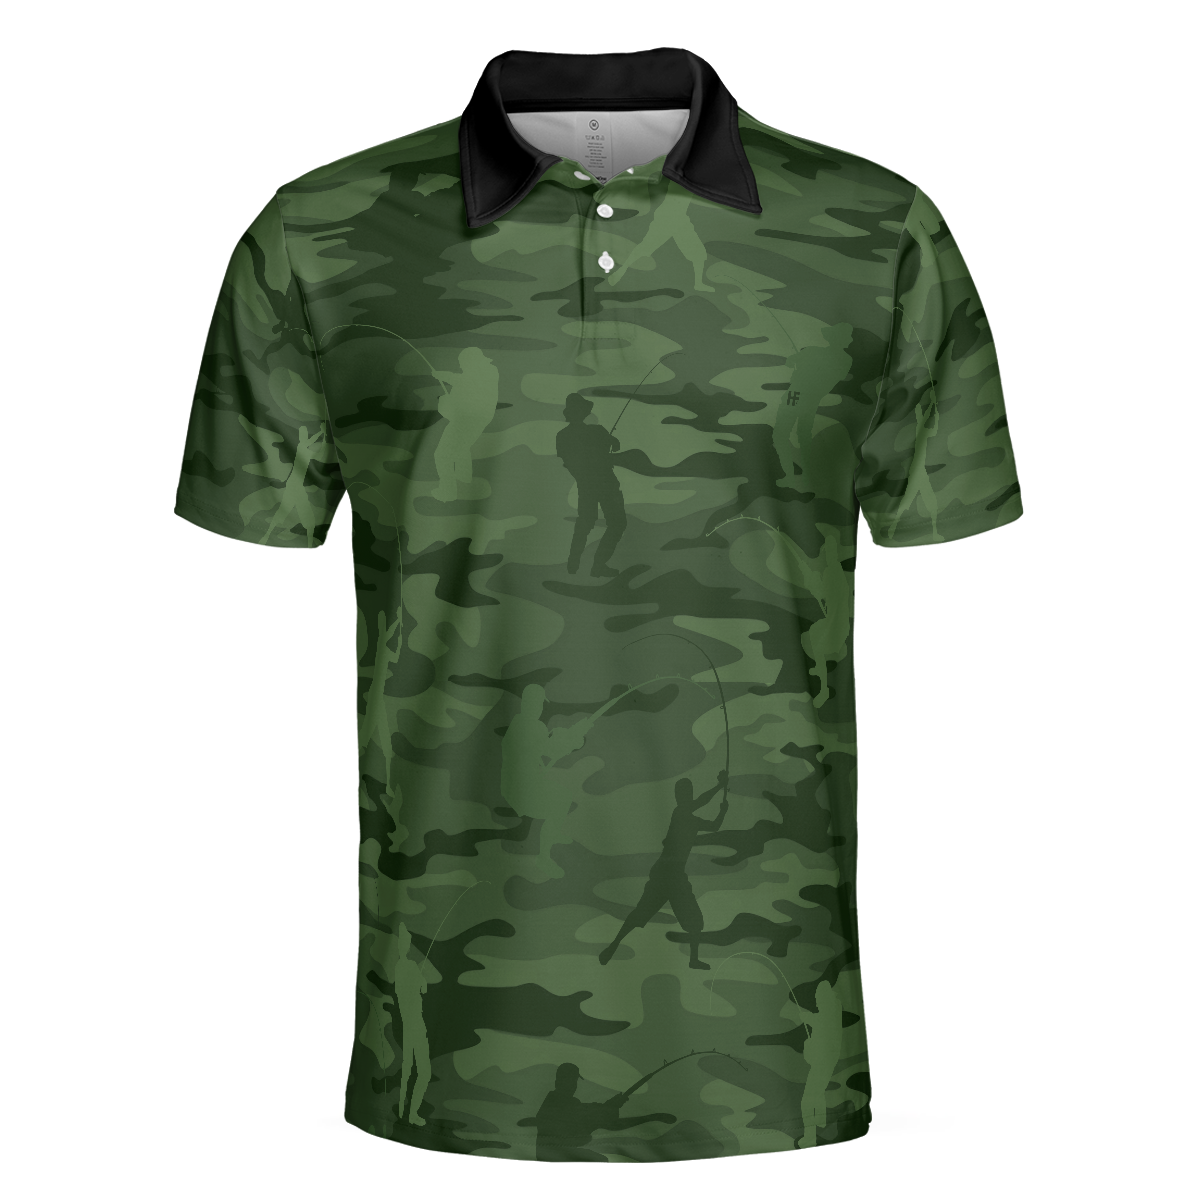 Green Camouflage Fisherman Silhouette All Over Print Men Polo Shirt, Unique Golf Shirt for Men, Cool Gift for Fishing Lovers